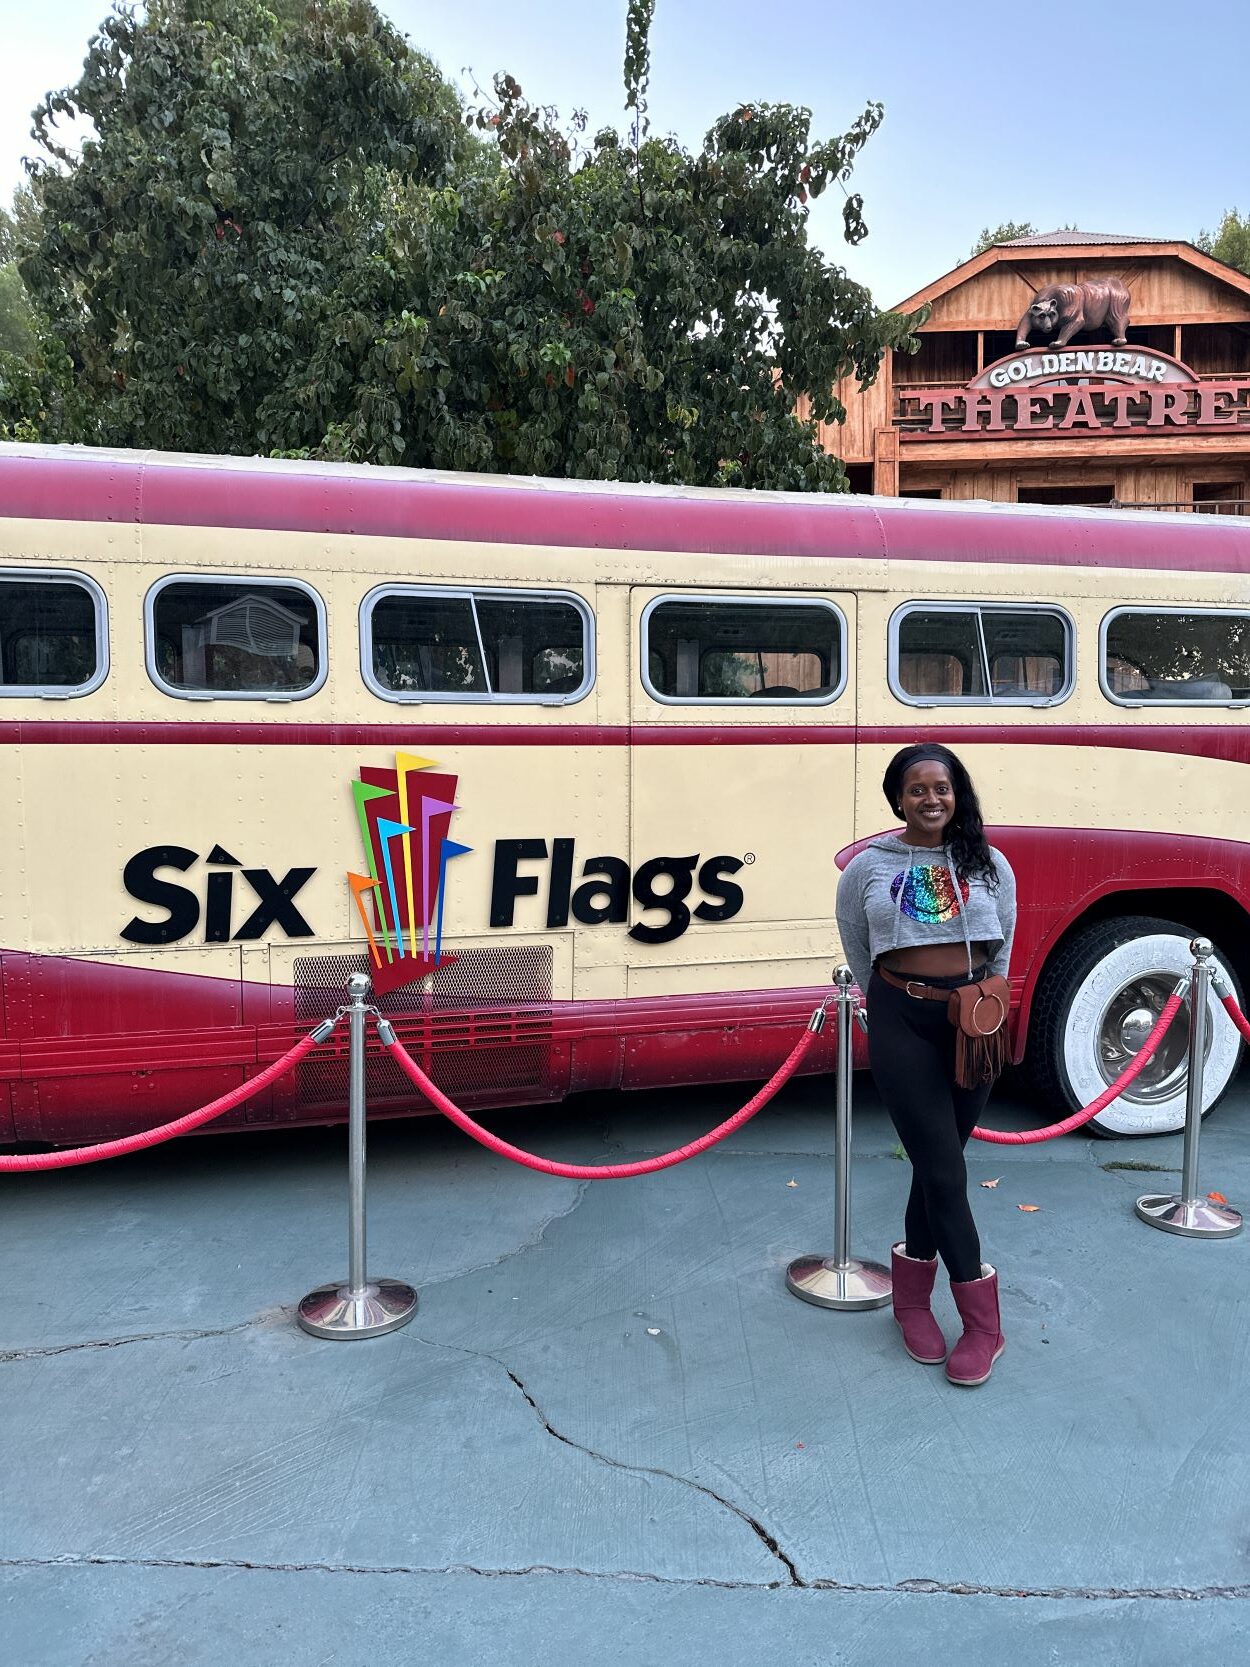 An image of a woman standing in front of a bus with the Six Flags logo on it.